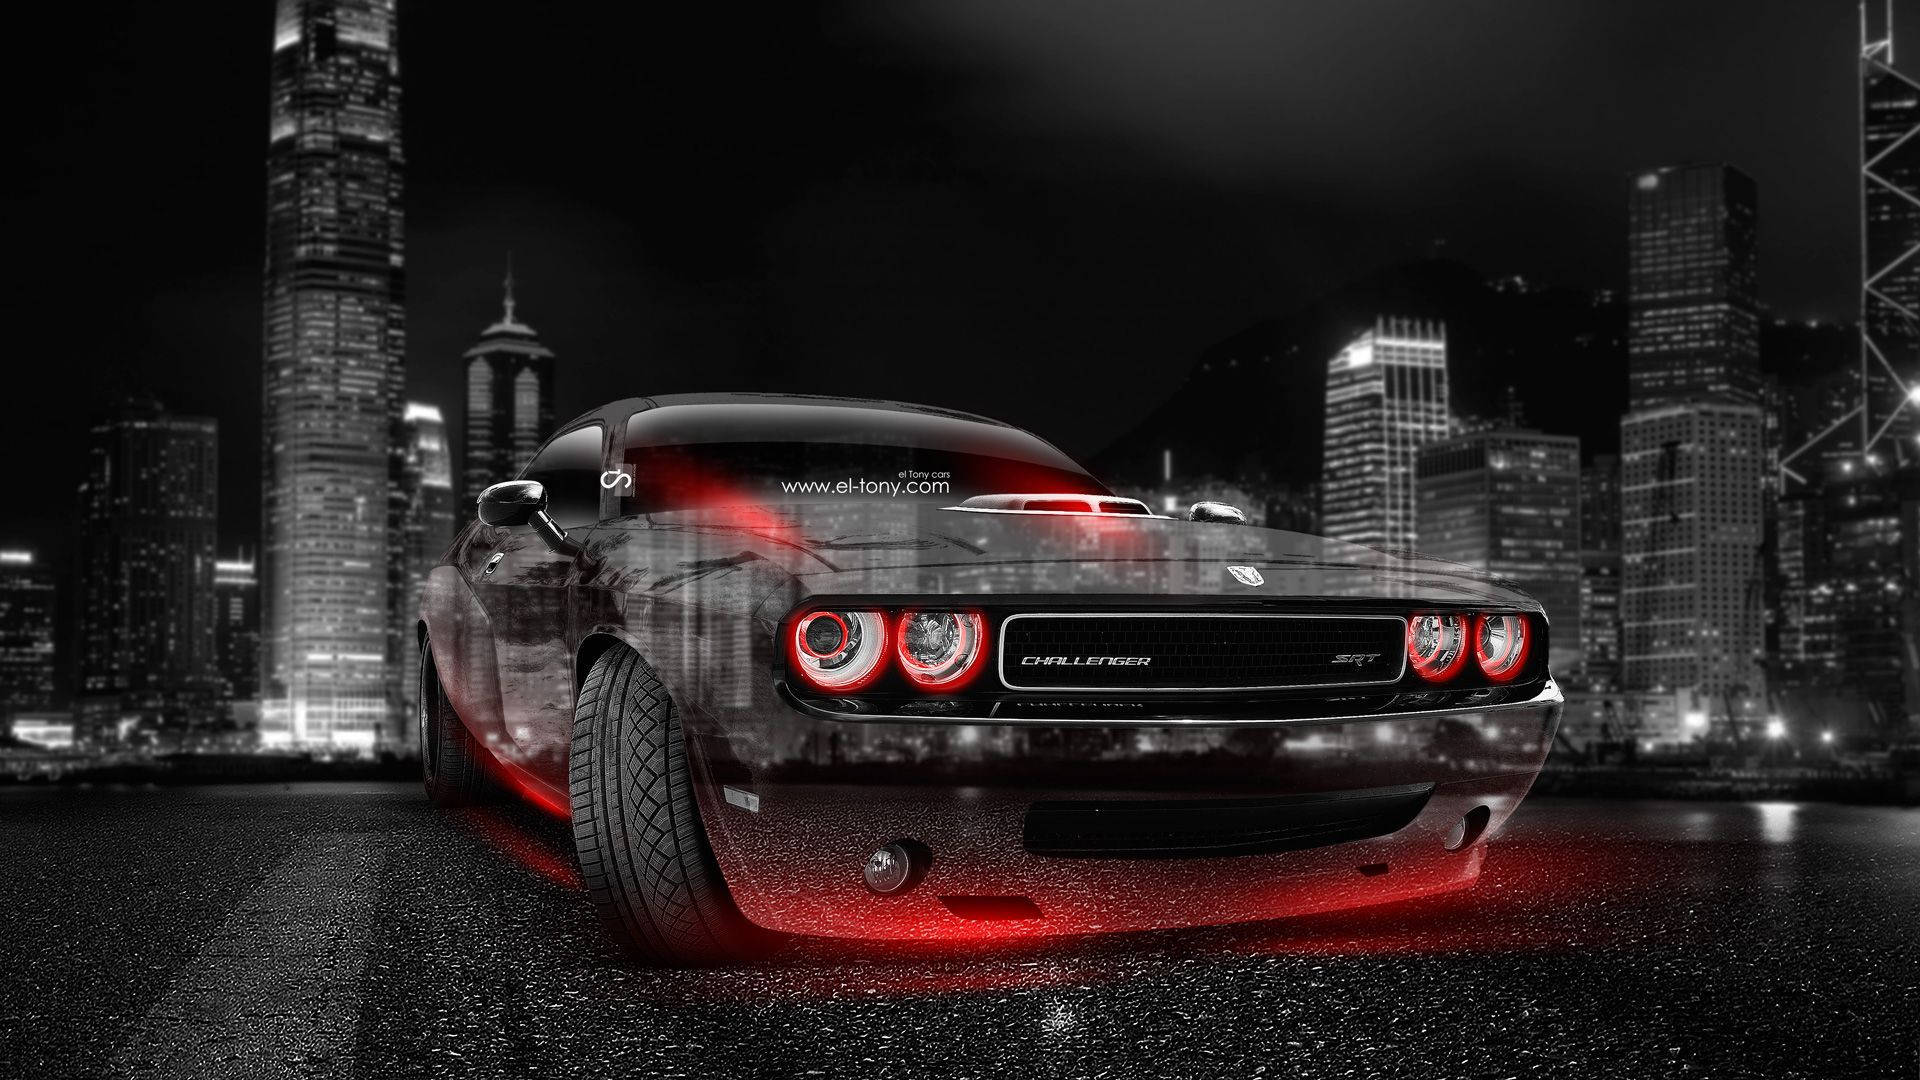 Dodge Challenger With Red Halo Headlights Background